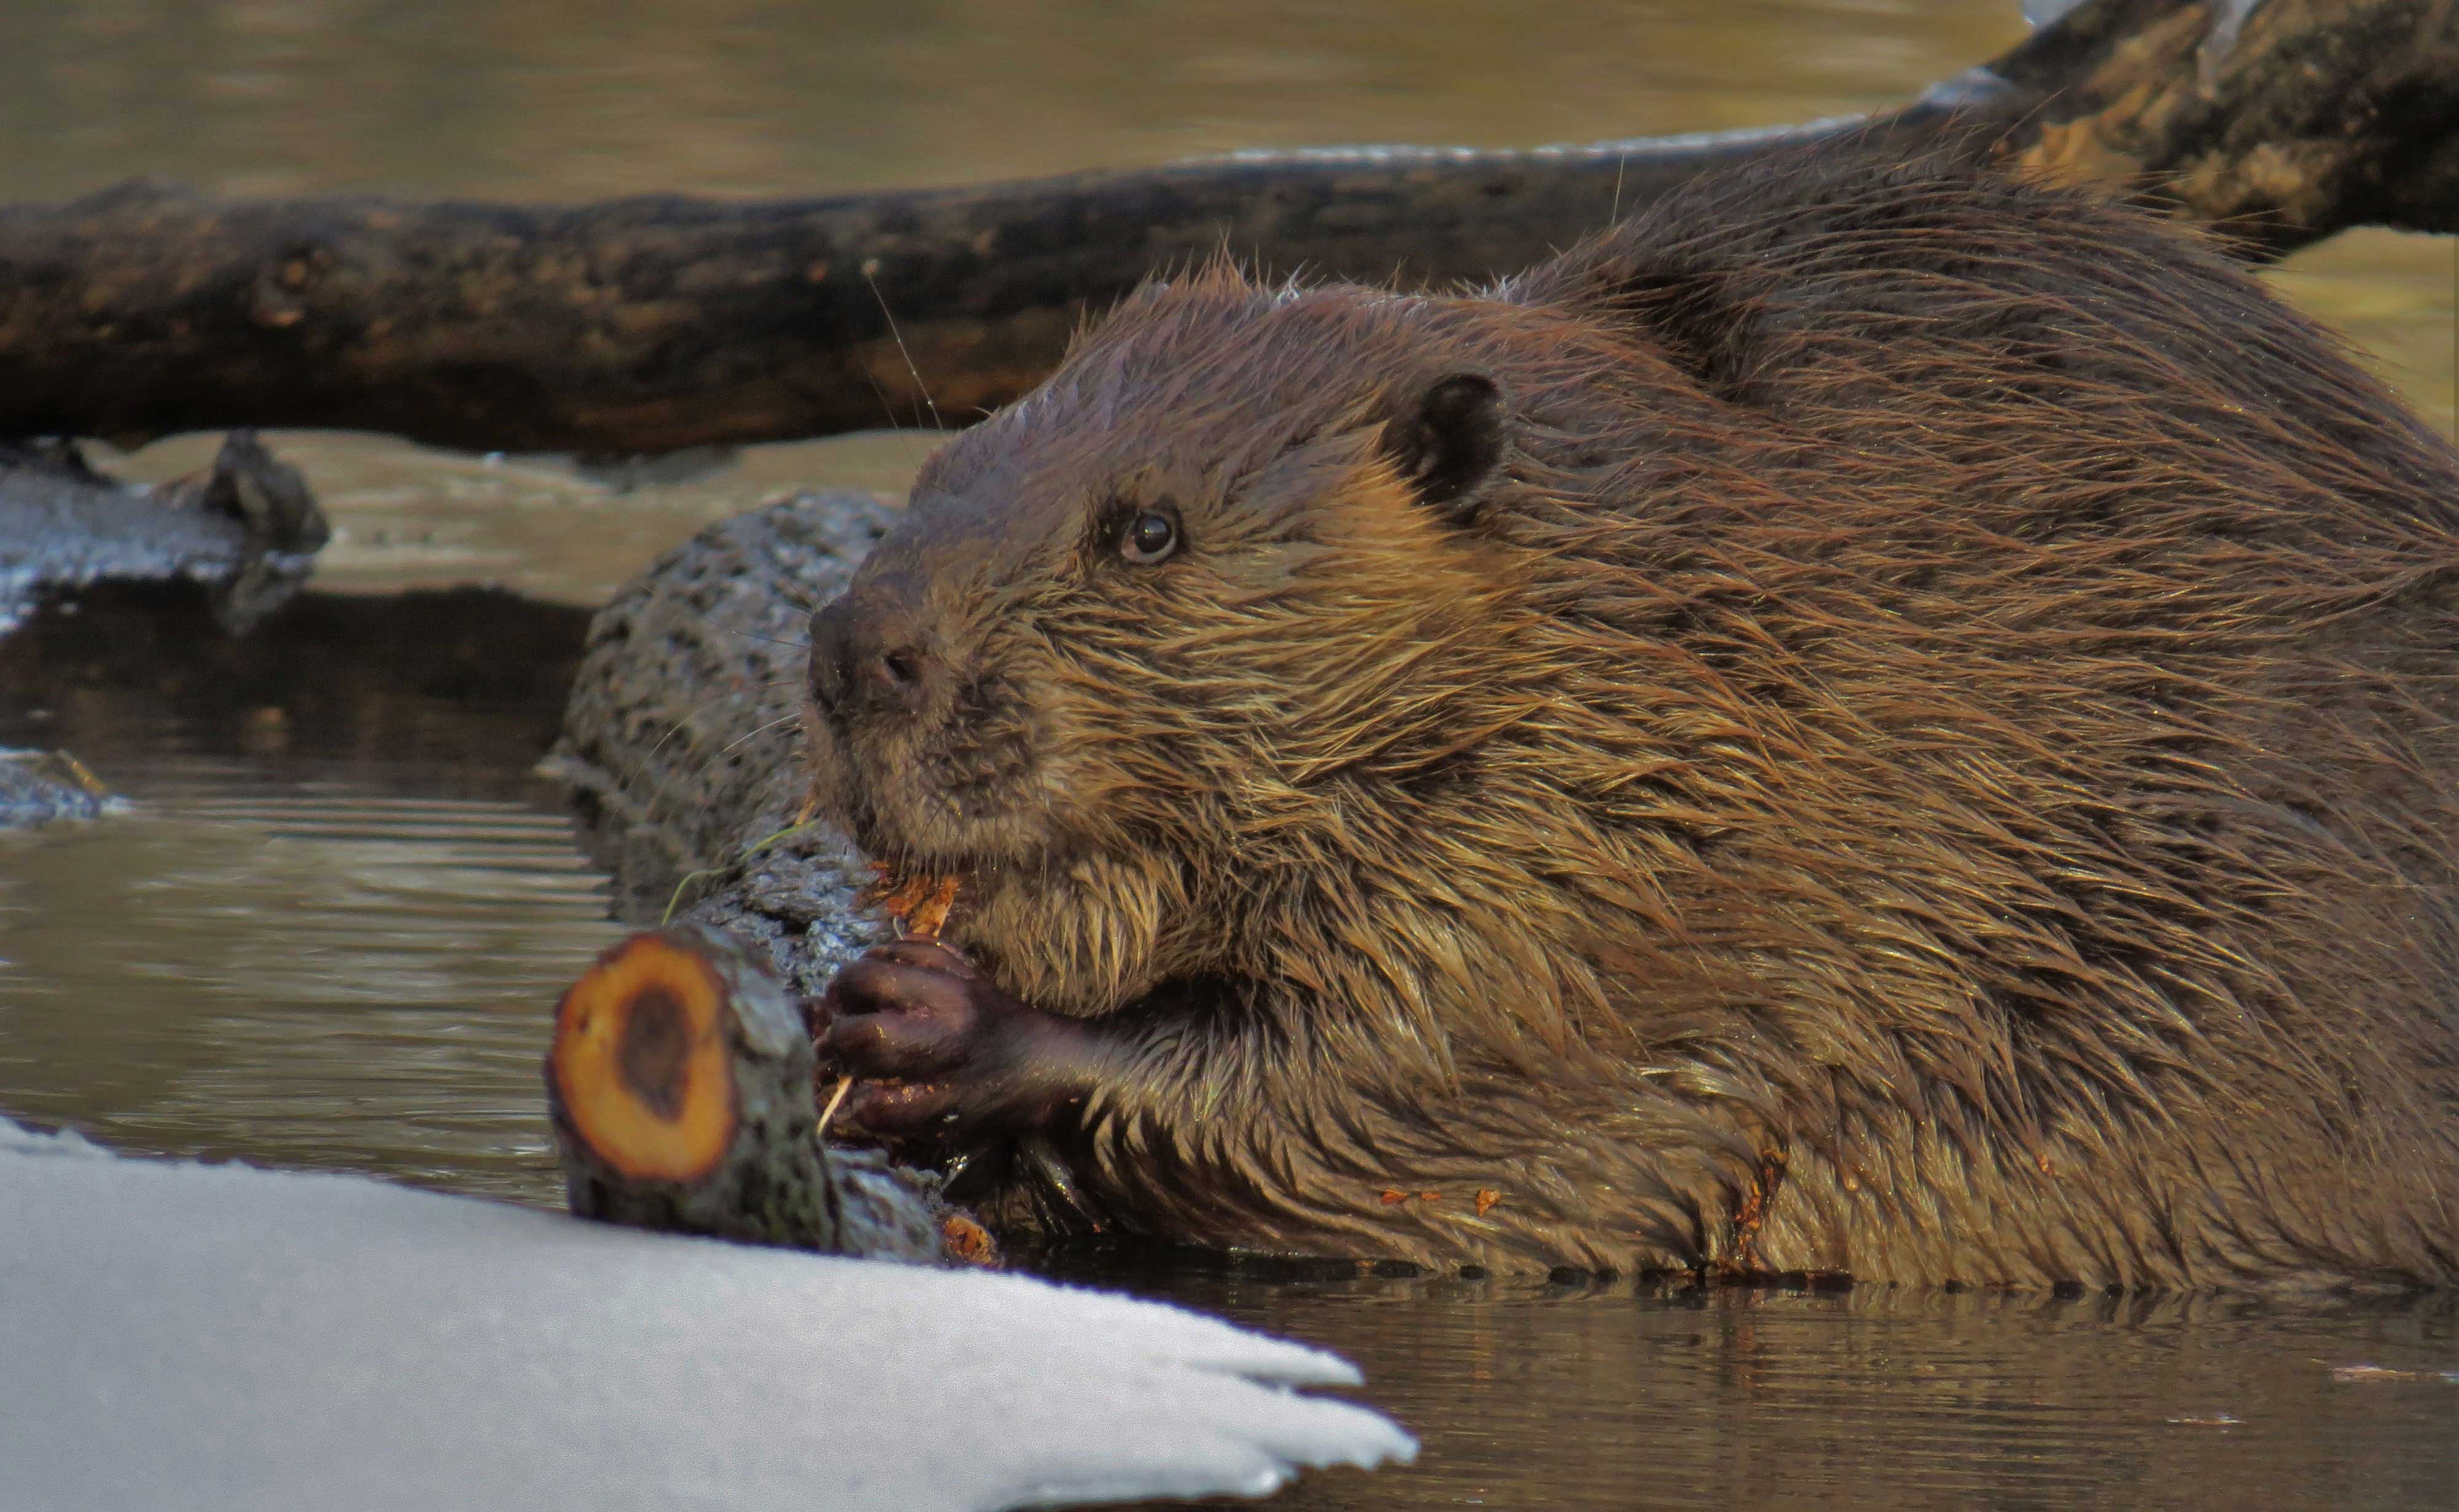 A beaver gnawing on wood.